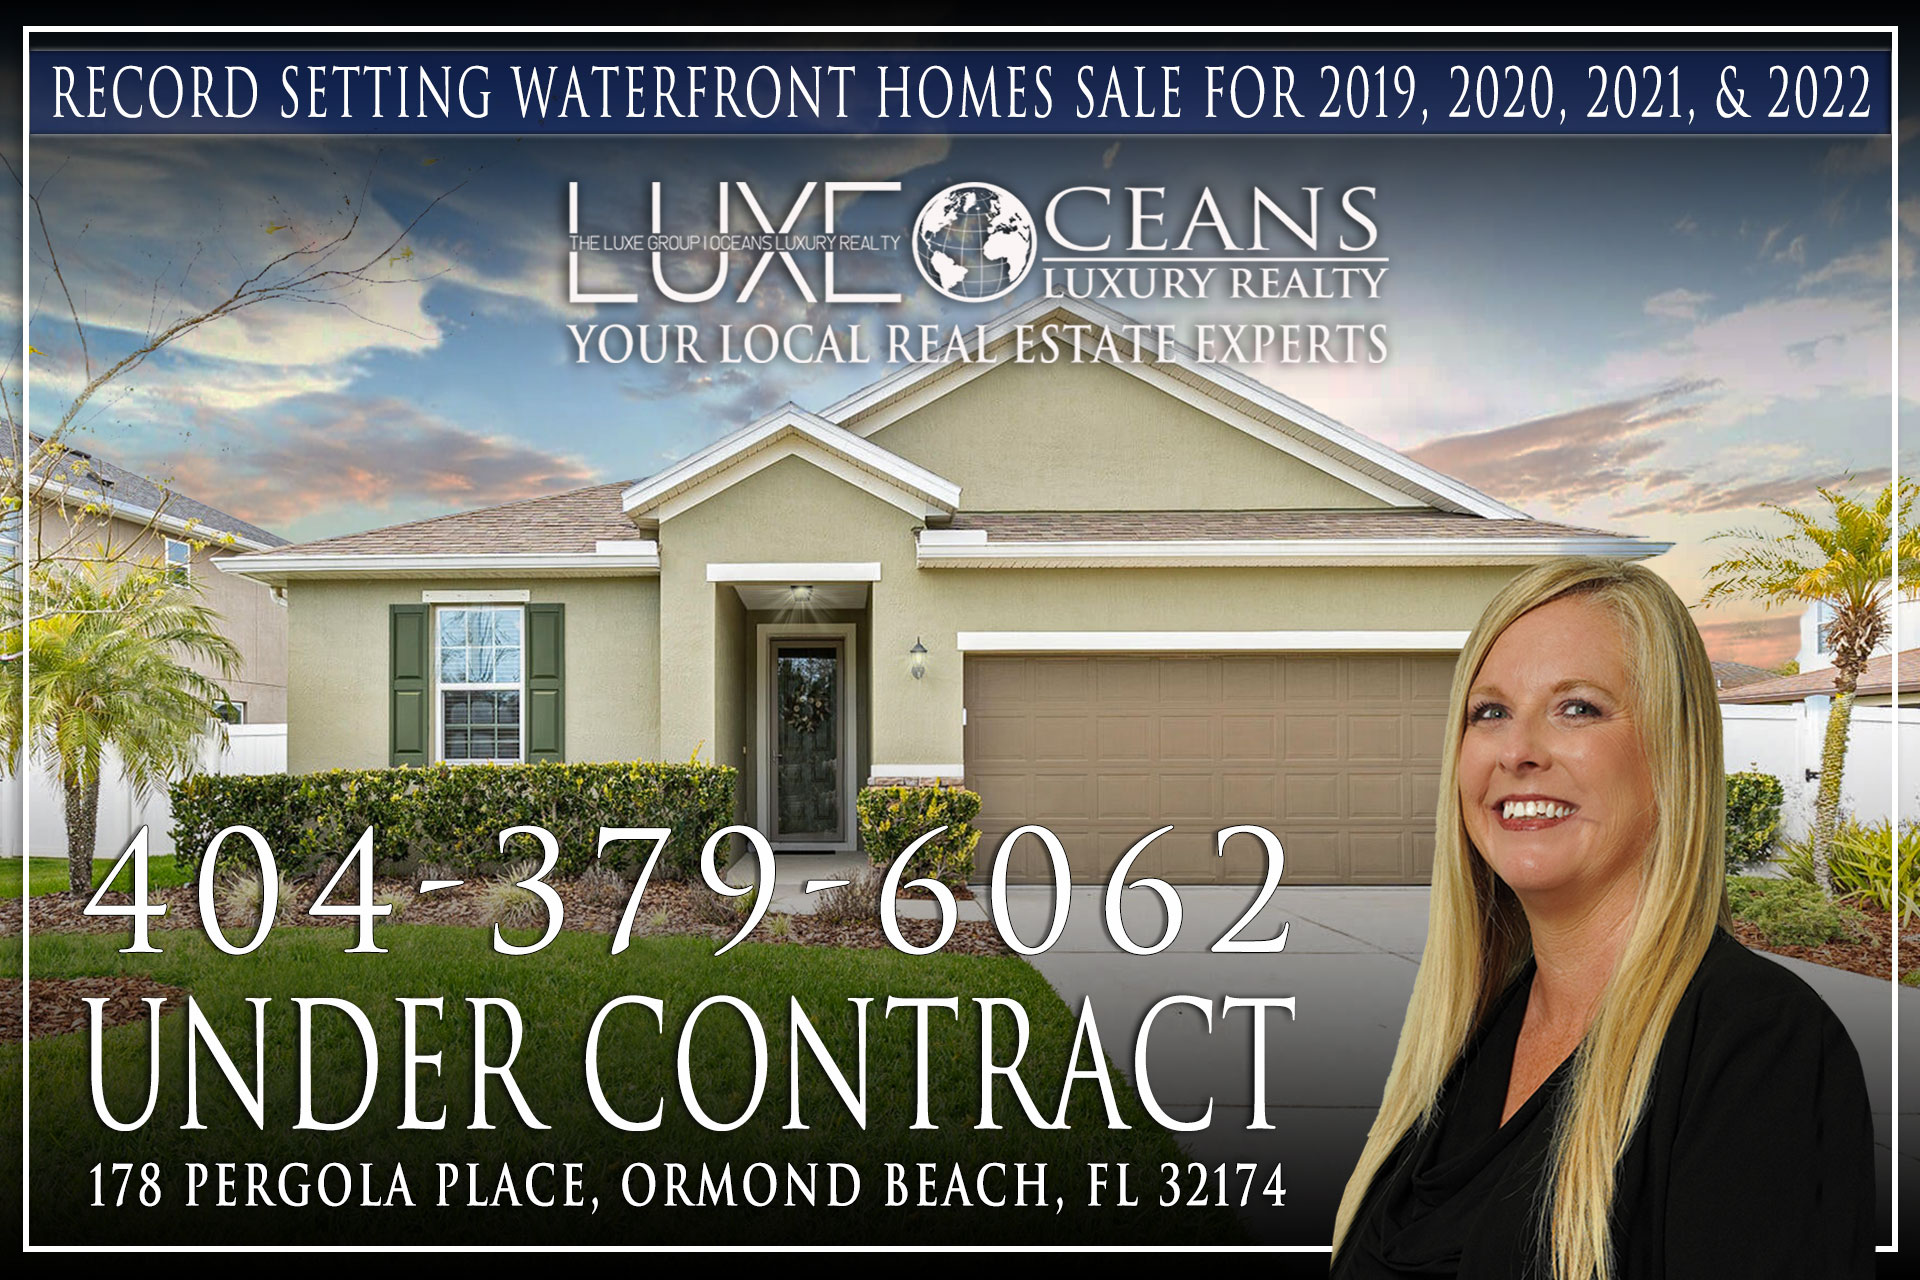 Ormond Beach Florida Waterfront Homes For Sale. 178 Pergola Place in Ormond Beach is now under contract. The LUXE Group at Oceans Luxury Realty 386-299-4043